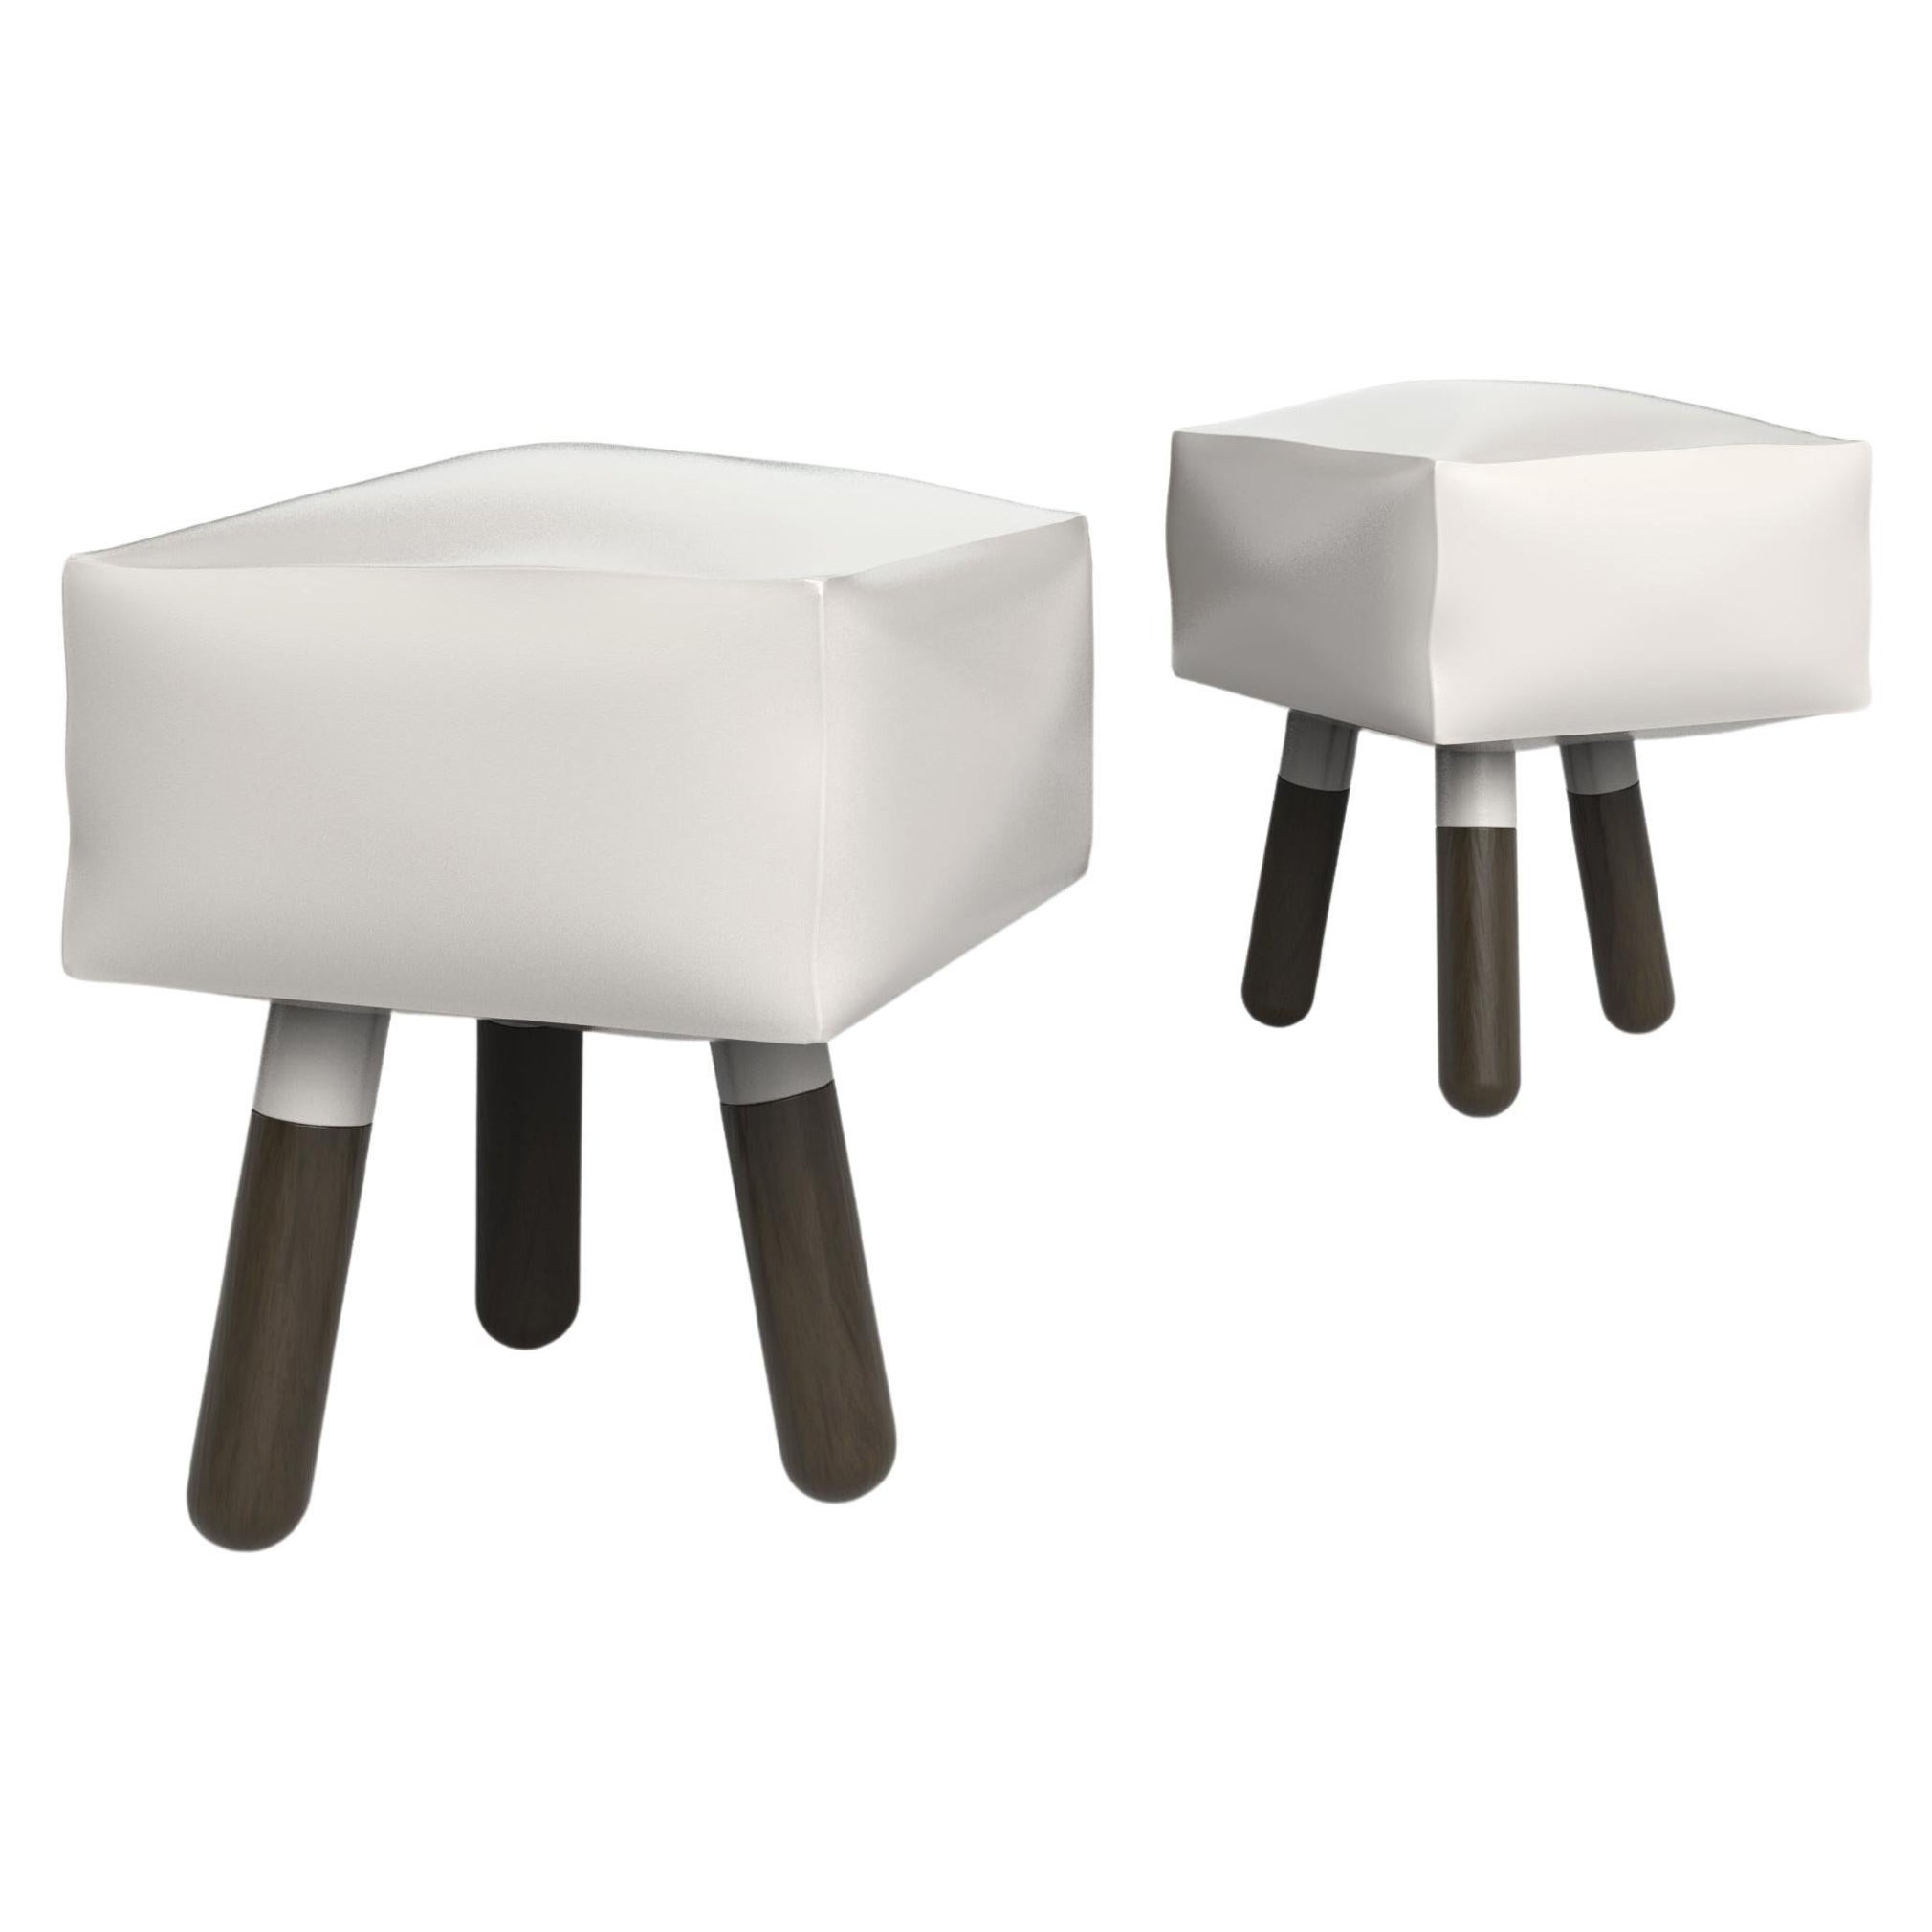 Set of 2 Icenine V2 Stools by Edizione Limitata For Sale